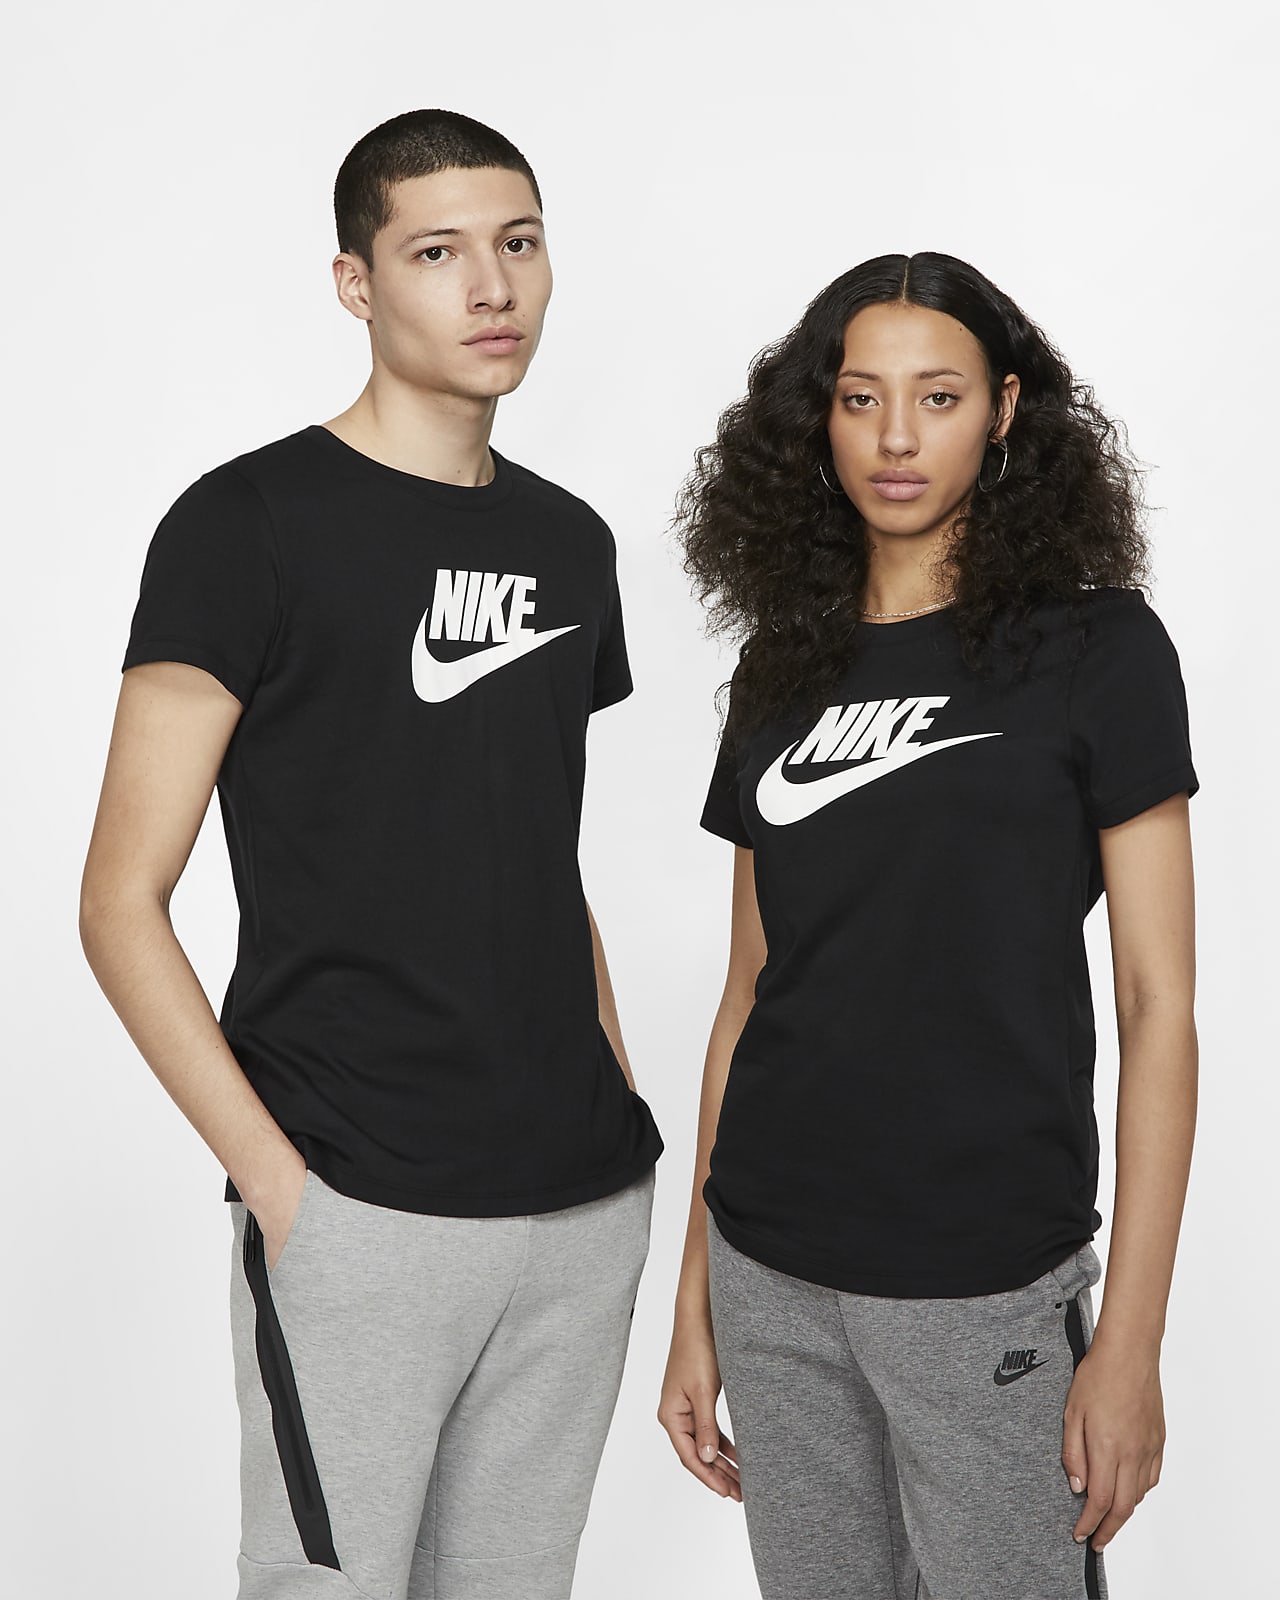 his and hers nike shirts